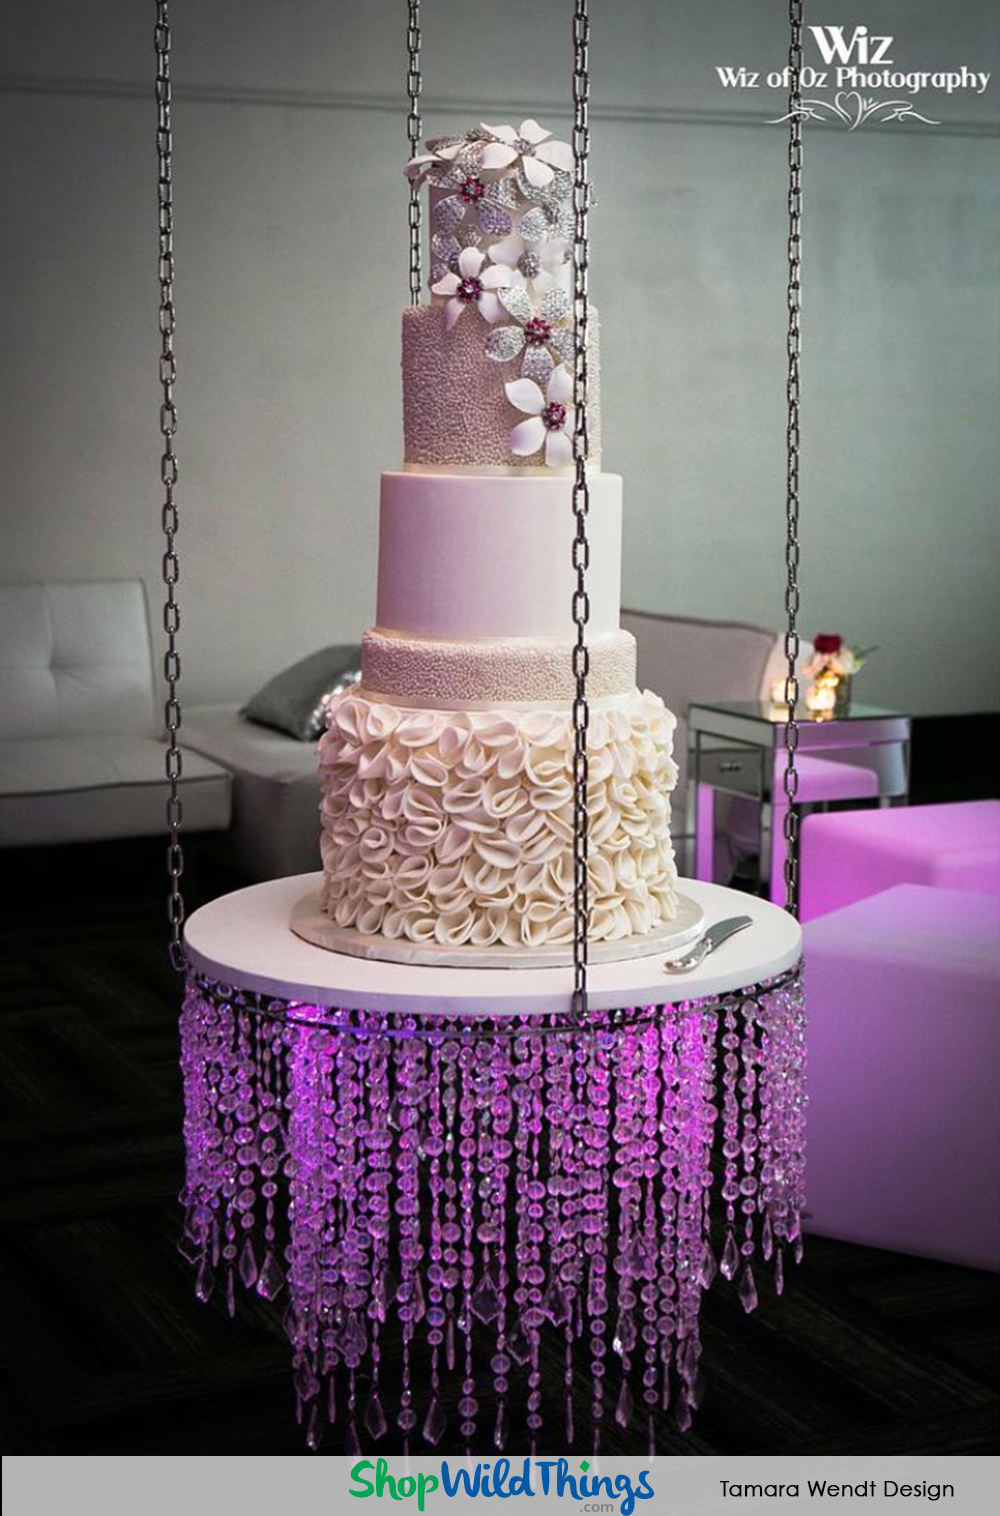 BLOG! Chandeliers as Reception Focal Points